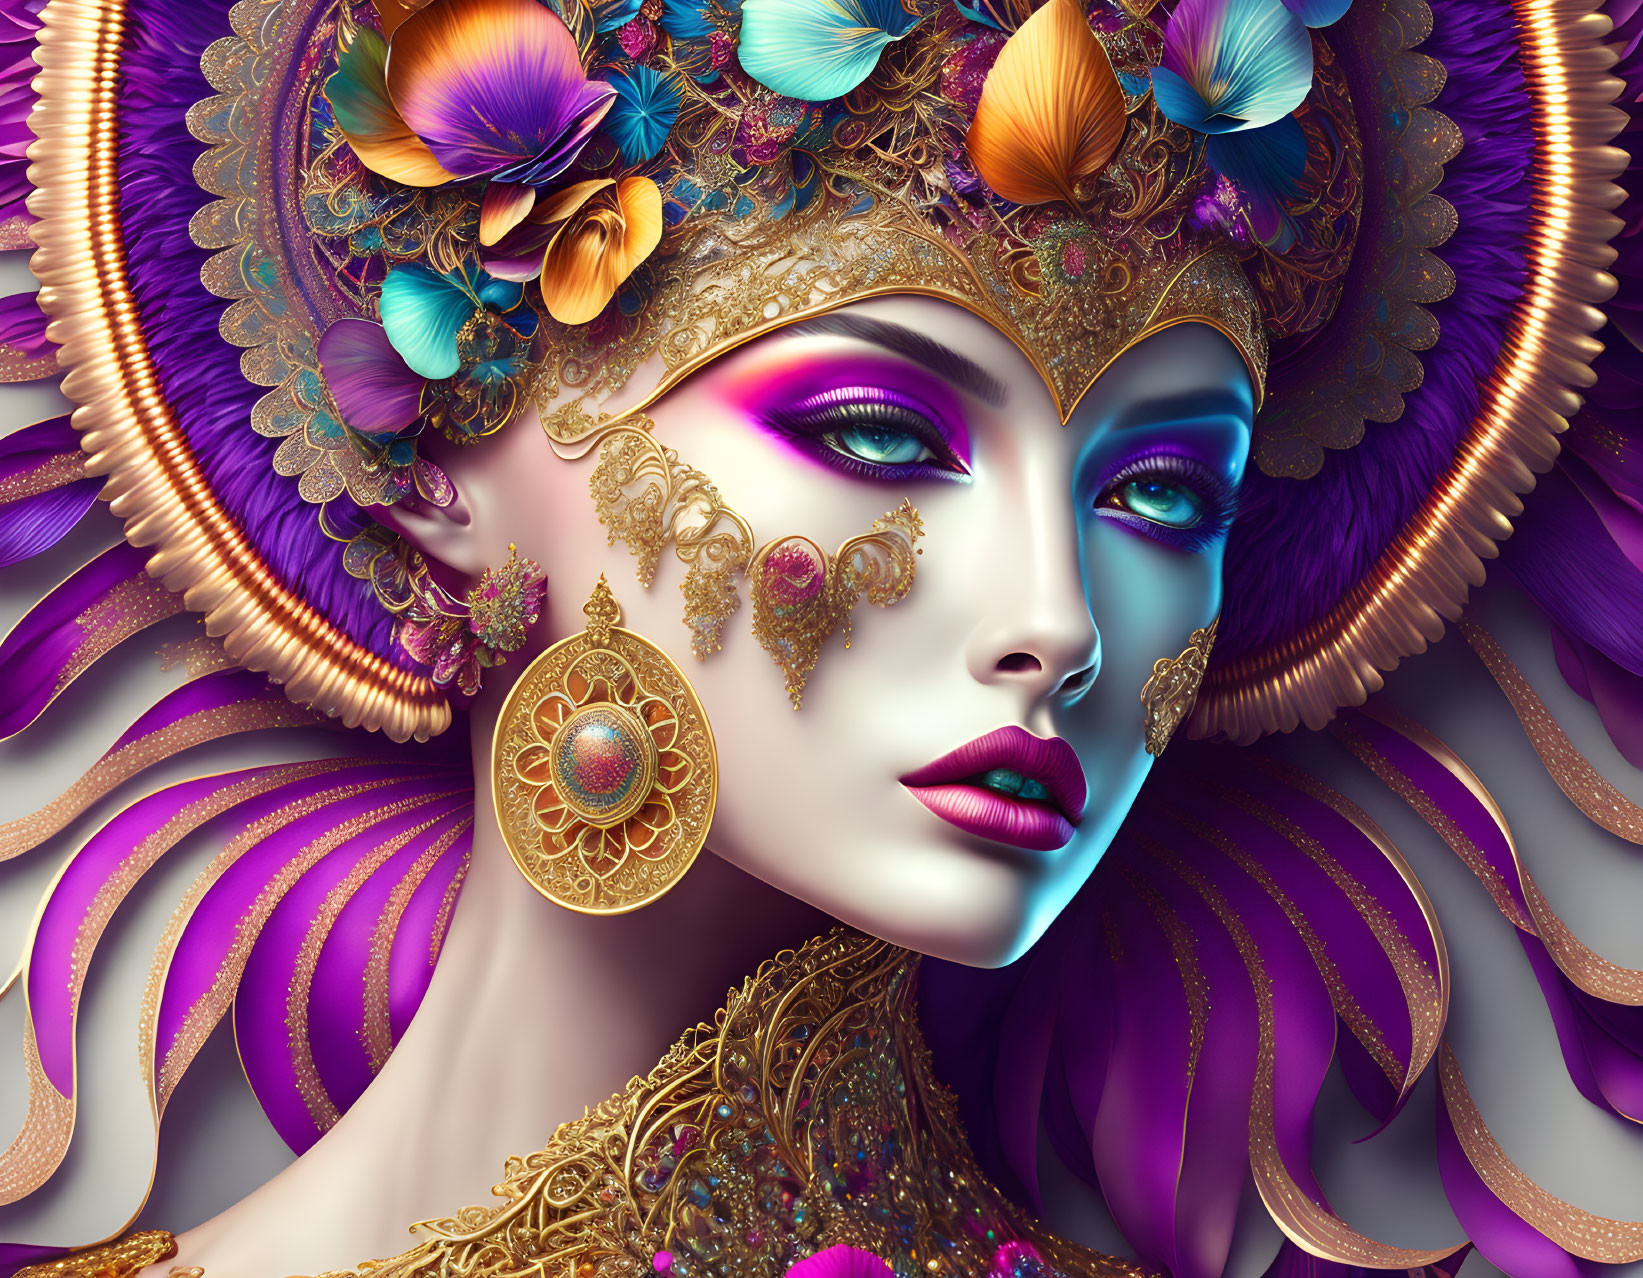 Colorful Female Portrait with Ornate Headdress & Gold Jewelry